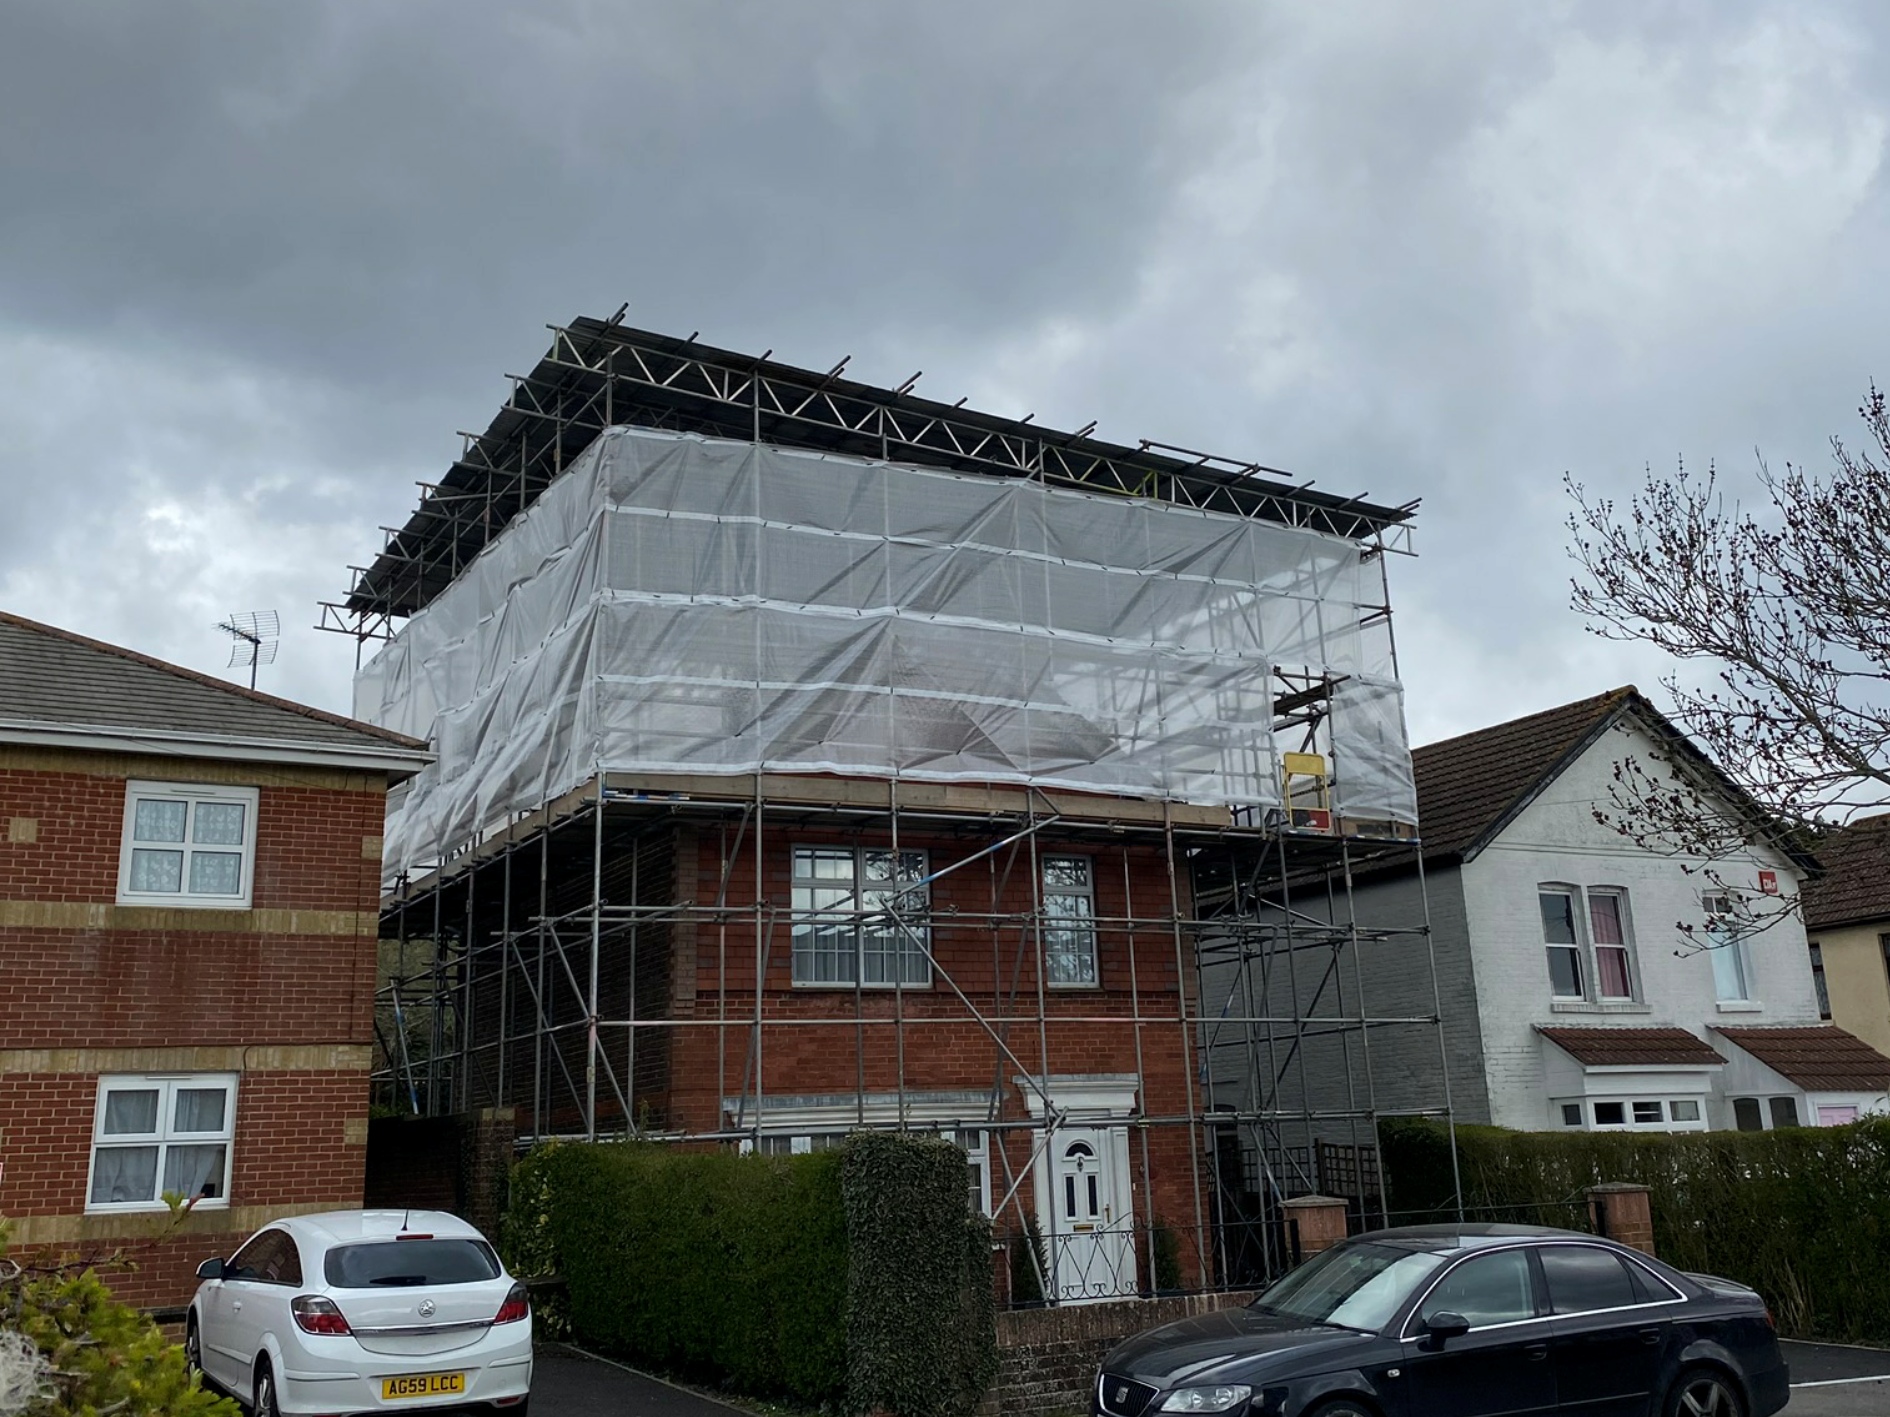 Scaffolding work Temporary roof scaffolding over a residential house